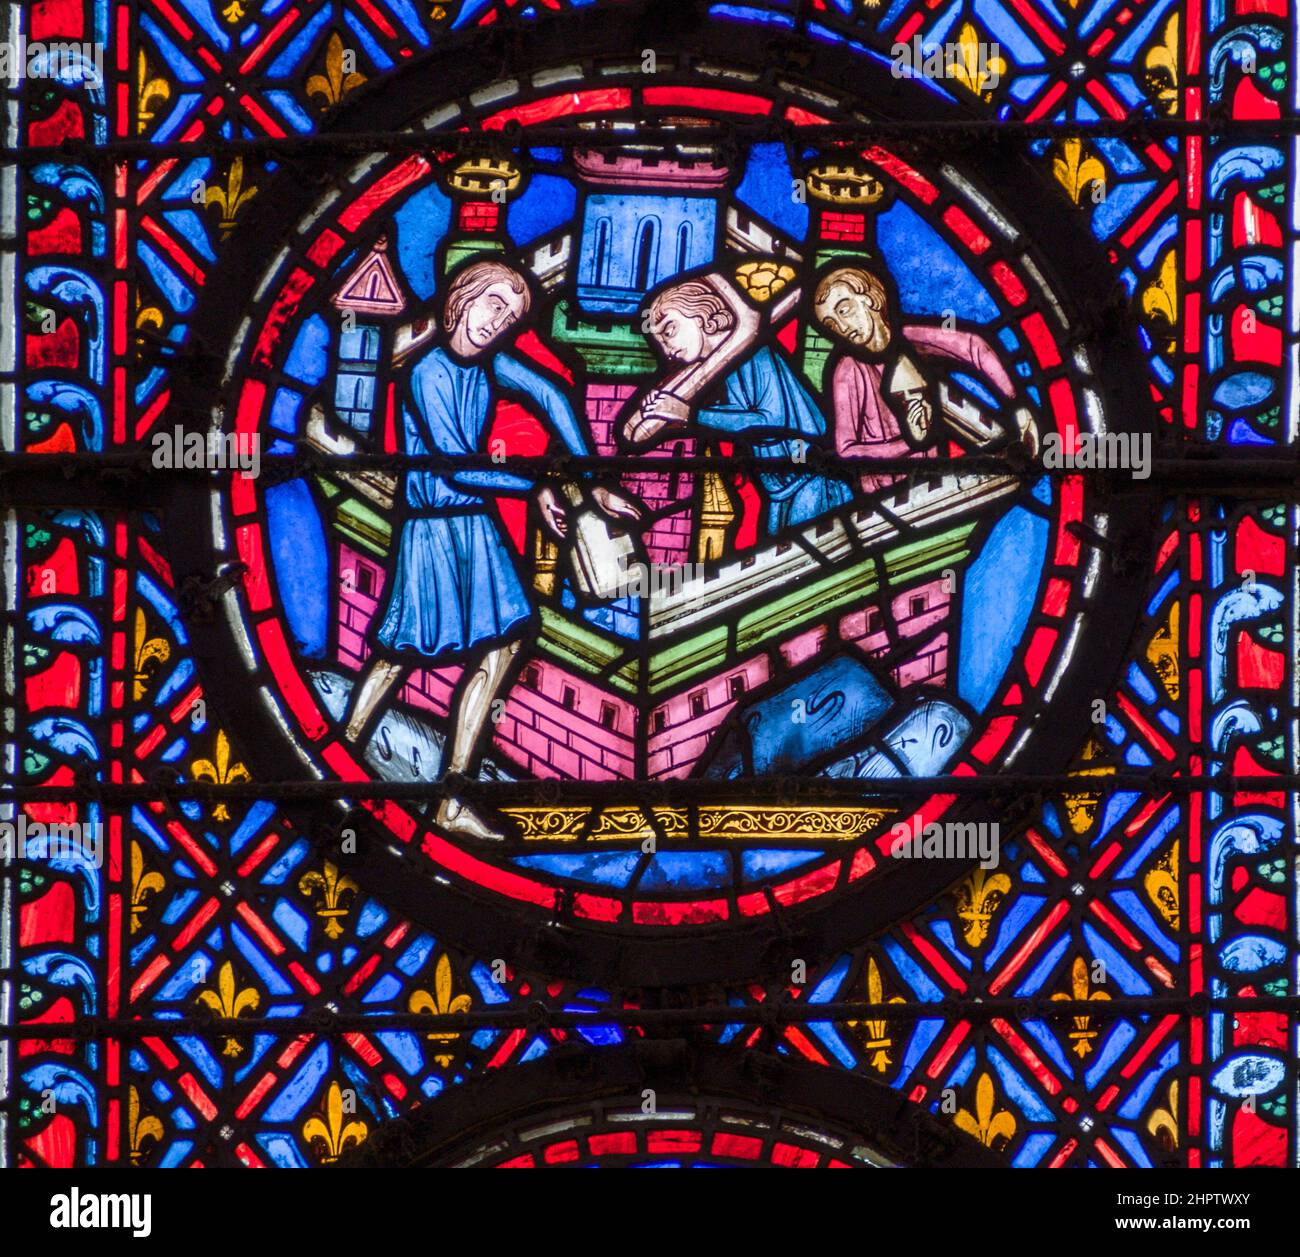 Castle building in Stained Glass: Detail fom an ancient stained glass window in Sainte Chapelle. Three men build the parapet at the top of a castle. Stock Photo